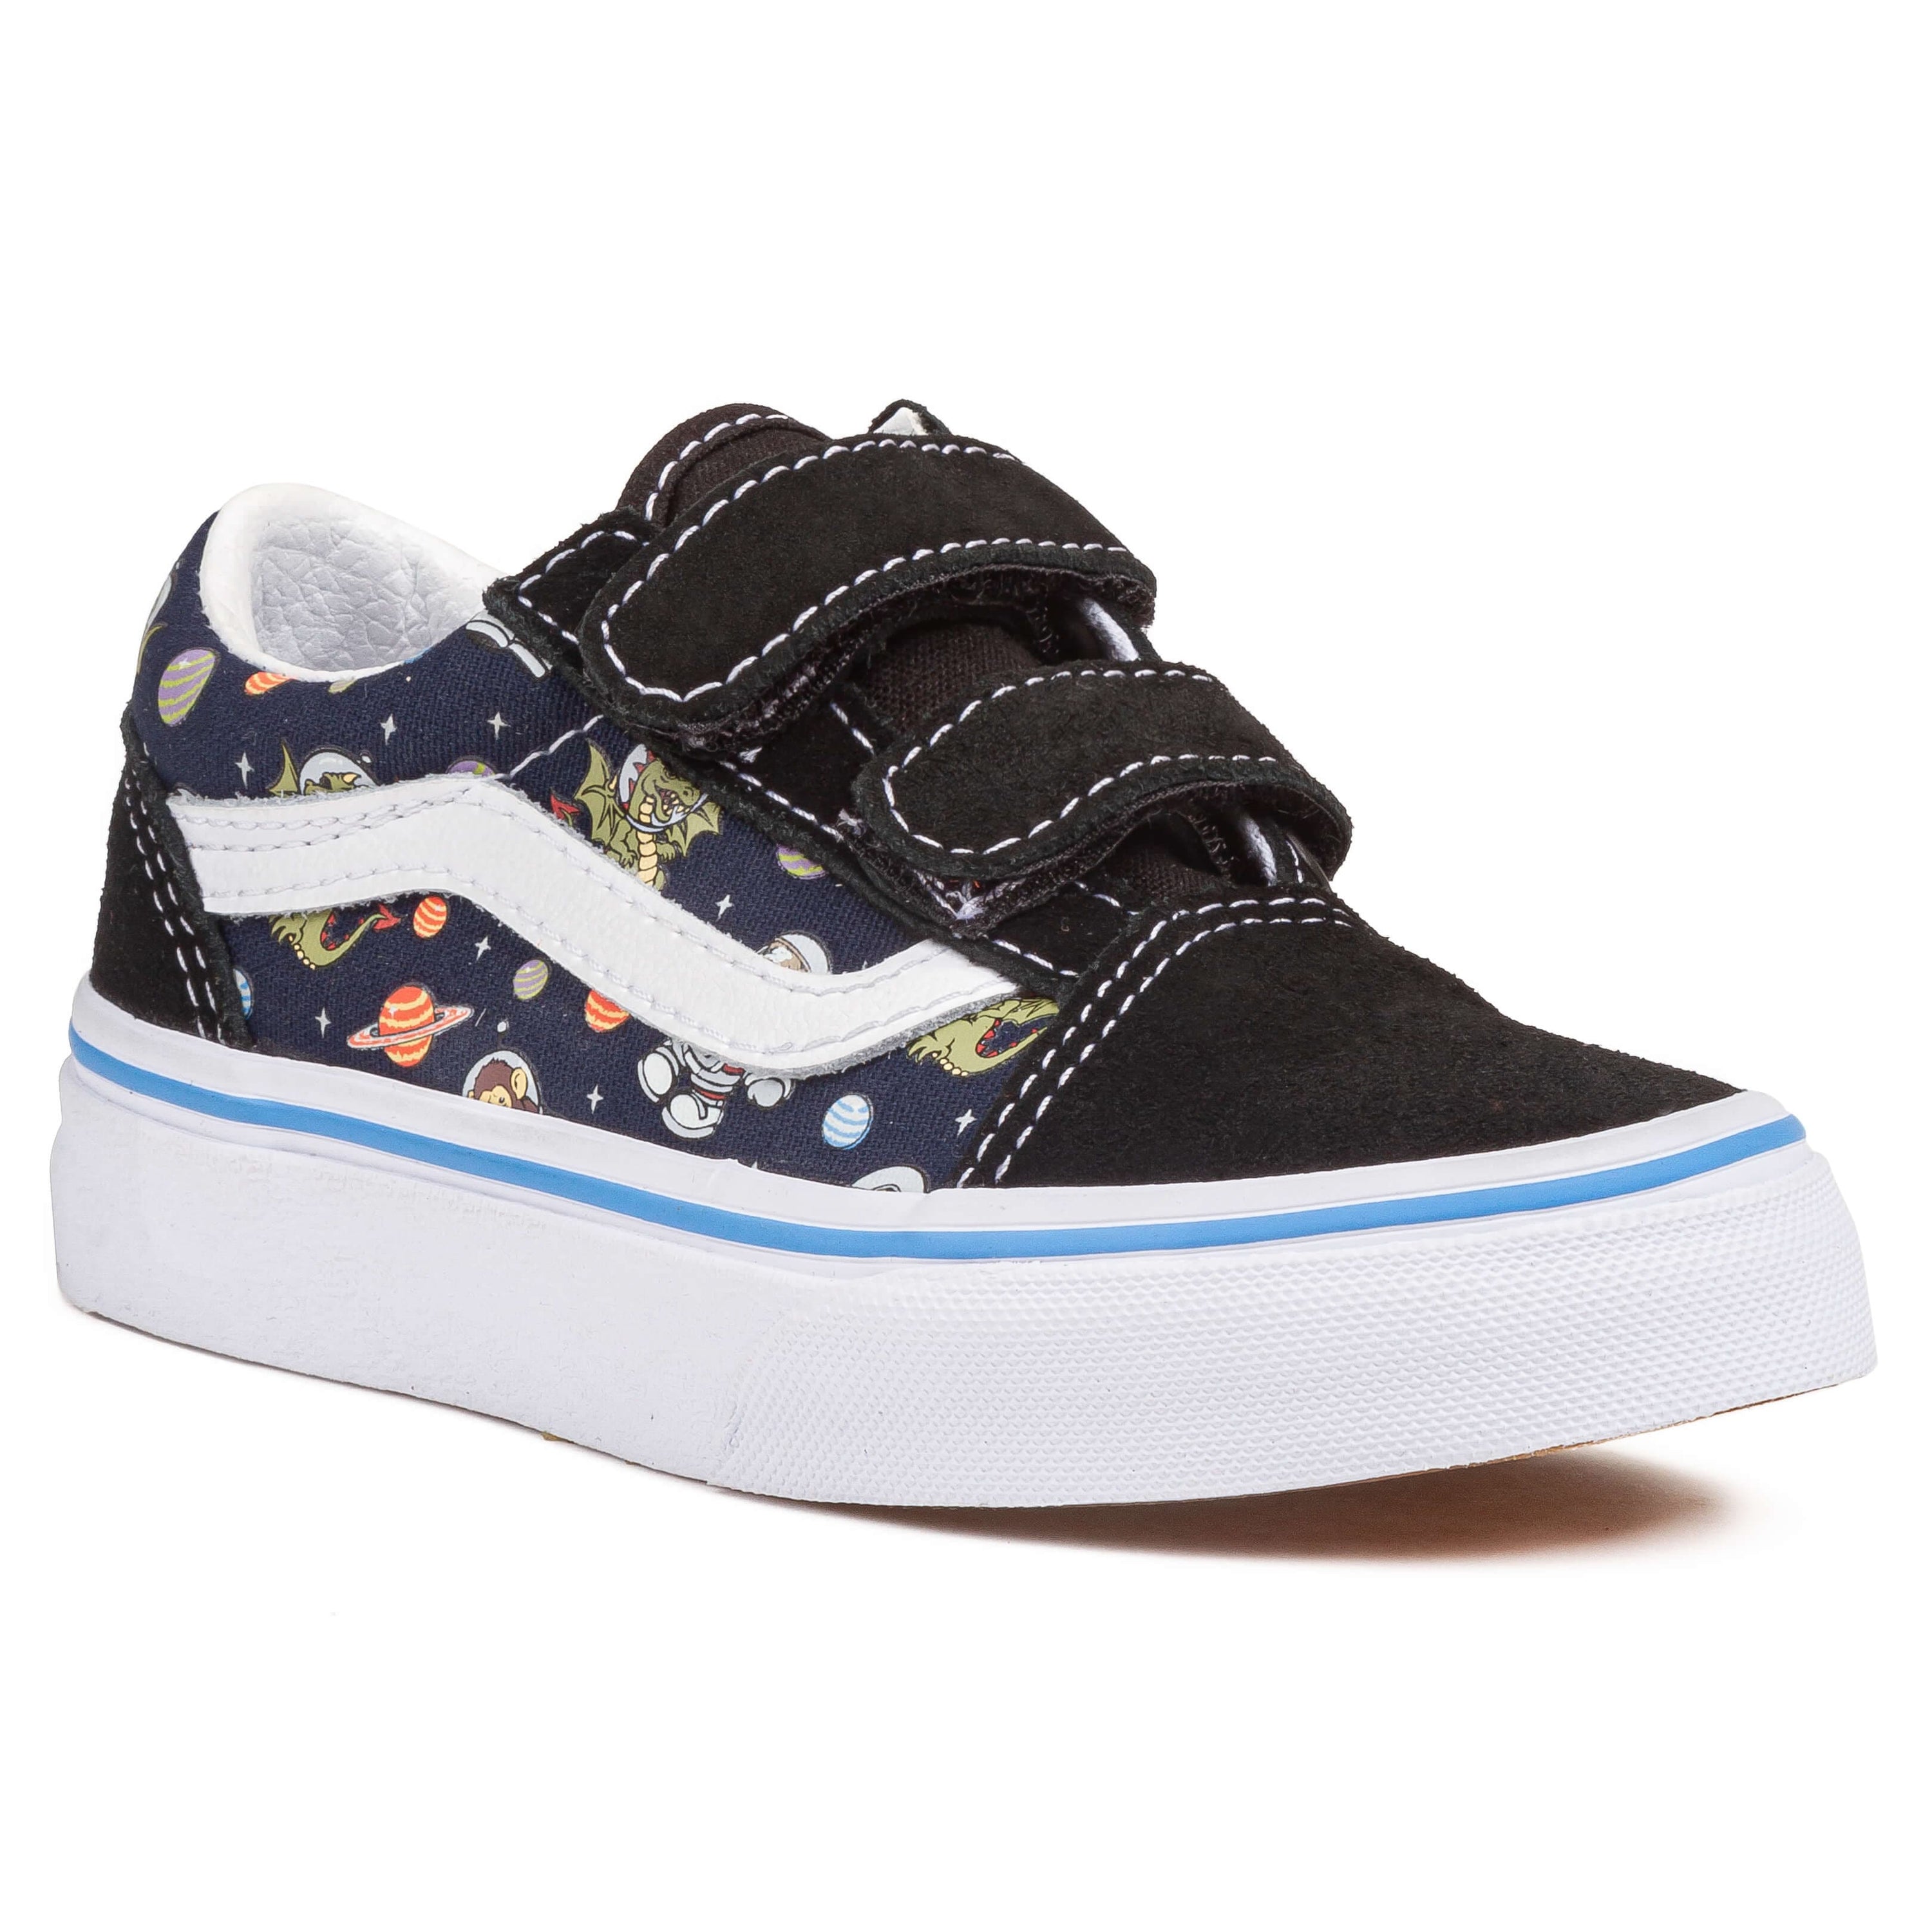 Vans Authentic Wavy Check Girls Shoes - Multi-Colored - 1